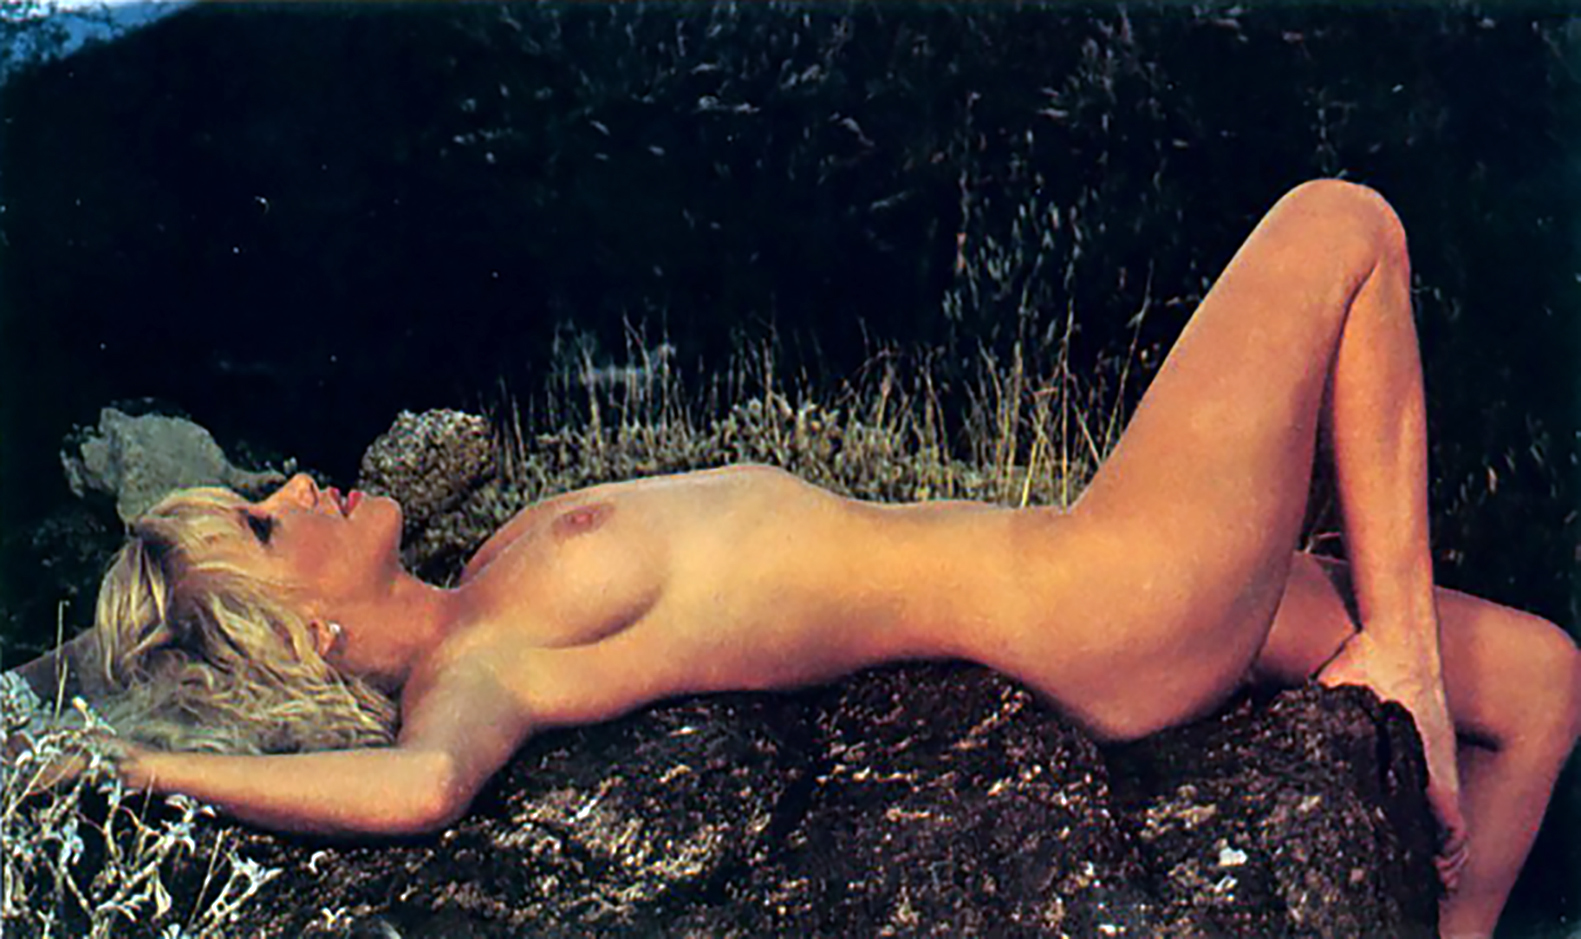 Suzanne Sommers nude pictures, Suzanne Somers Nude ULTIMATE, Naked Suzanne...